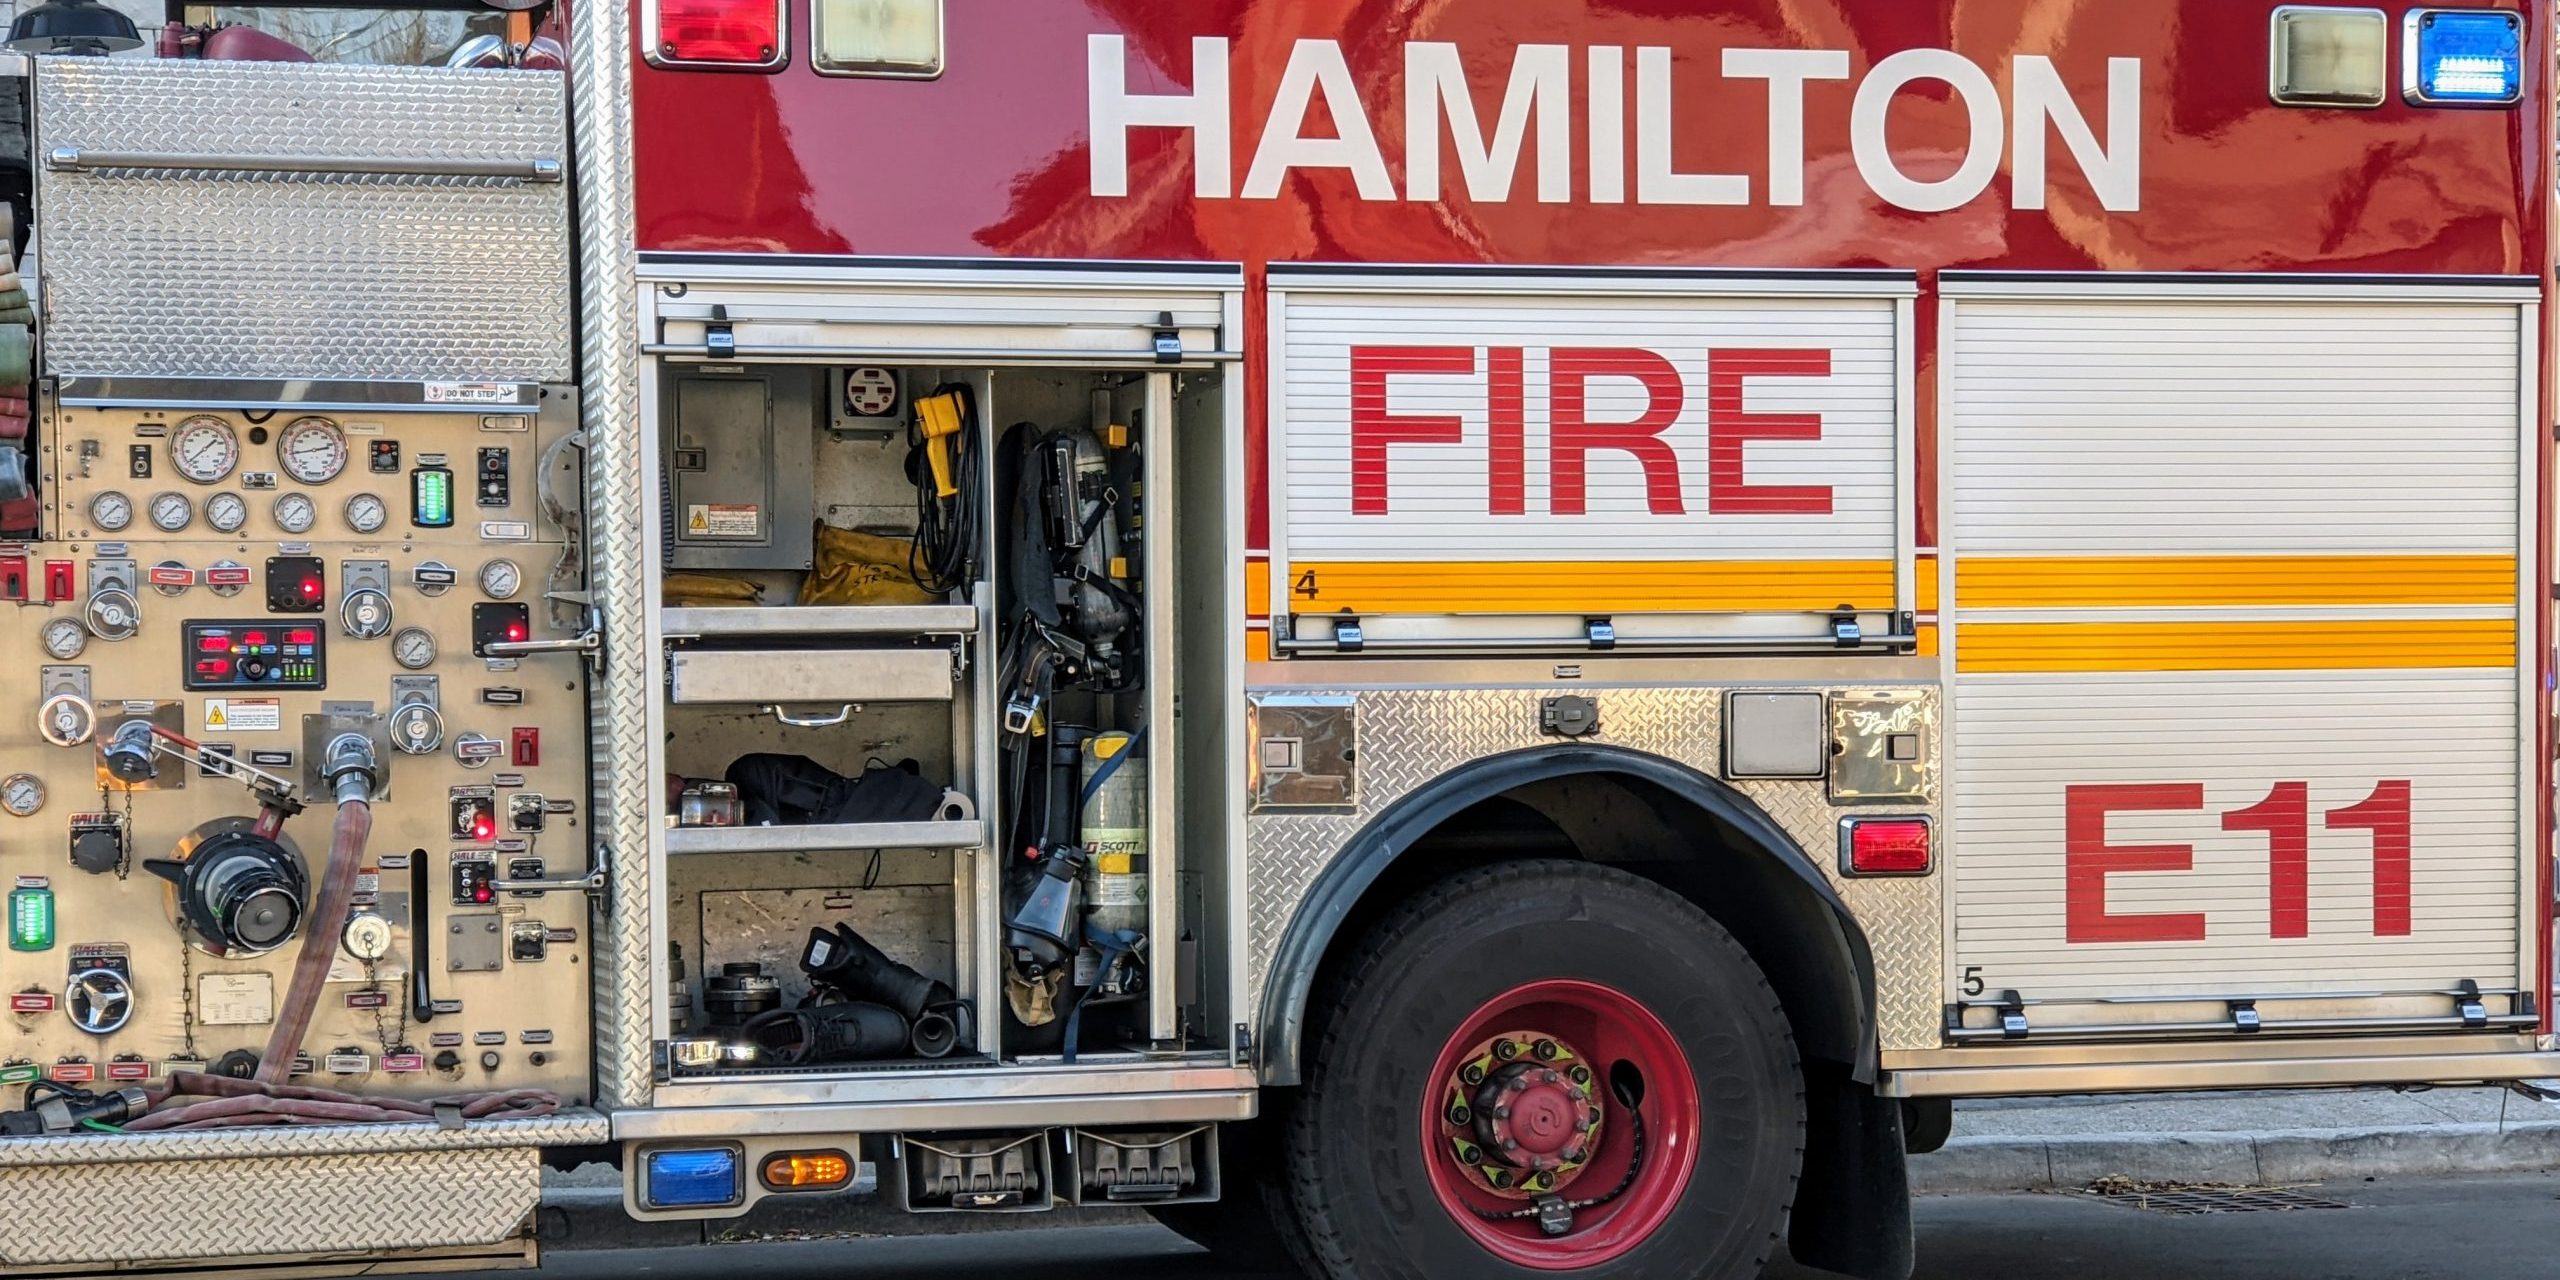 hamilton fire vacant buildings 45 47 ottawa st north east end police